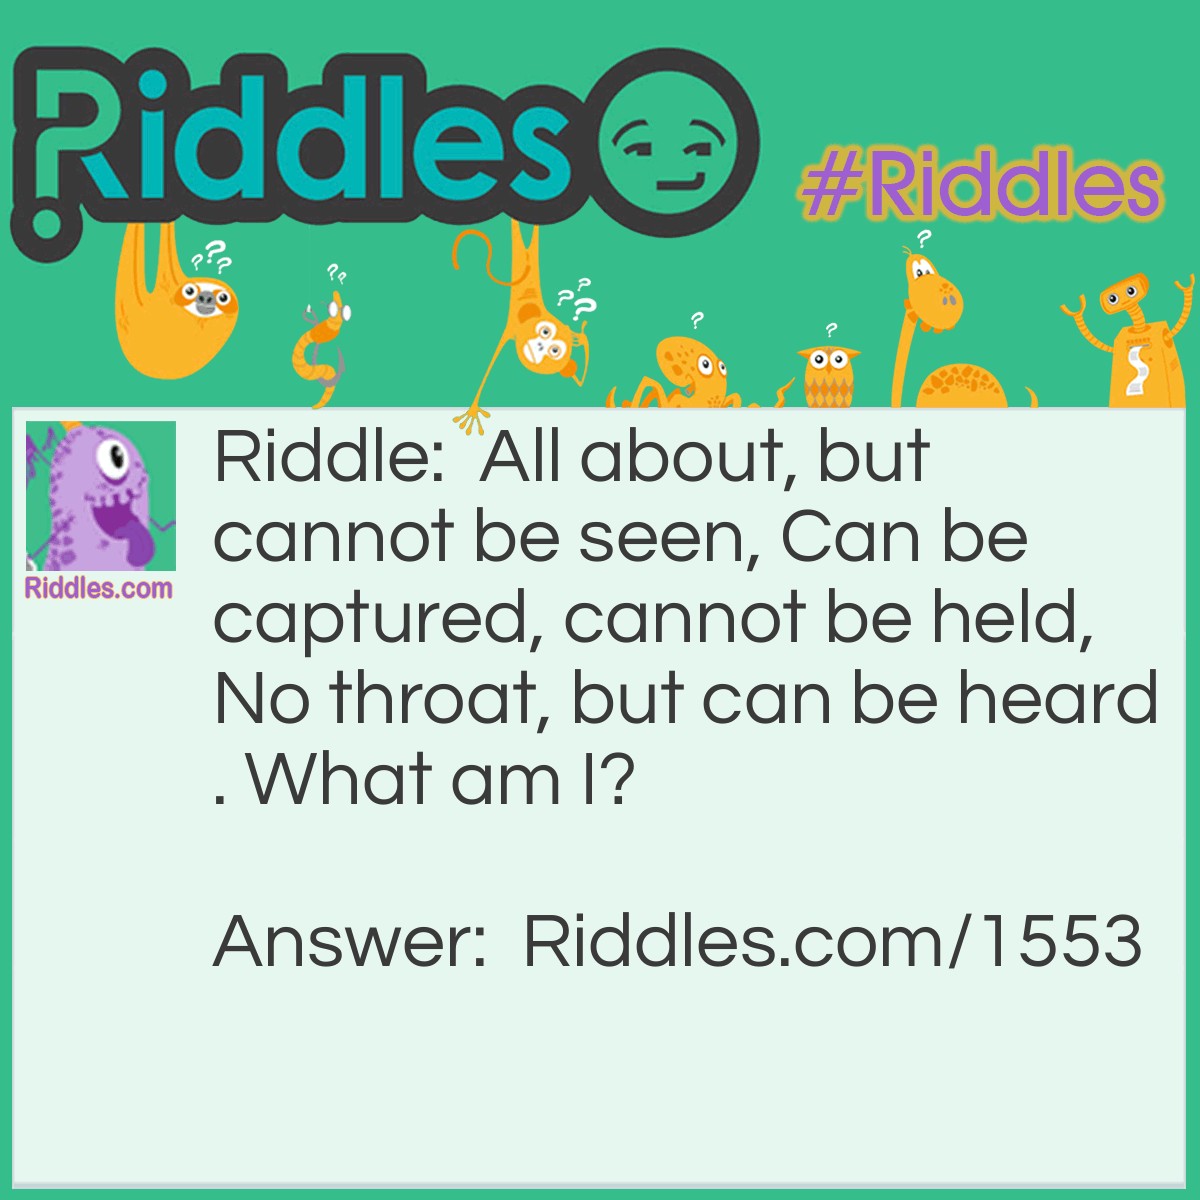 Riddle: All about, but cannot be seen, Can be captured, cannot be held, No throat, but can be heard. What am I? Answer: Wind